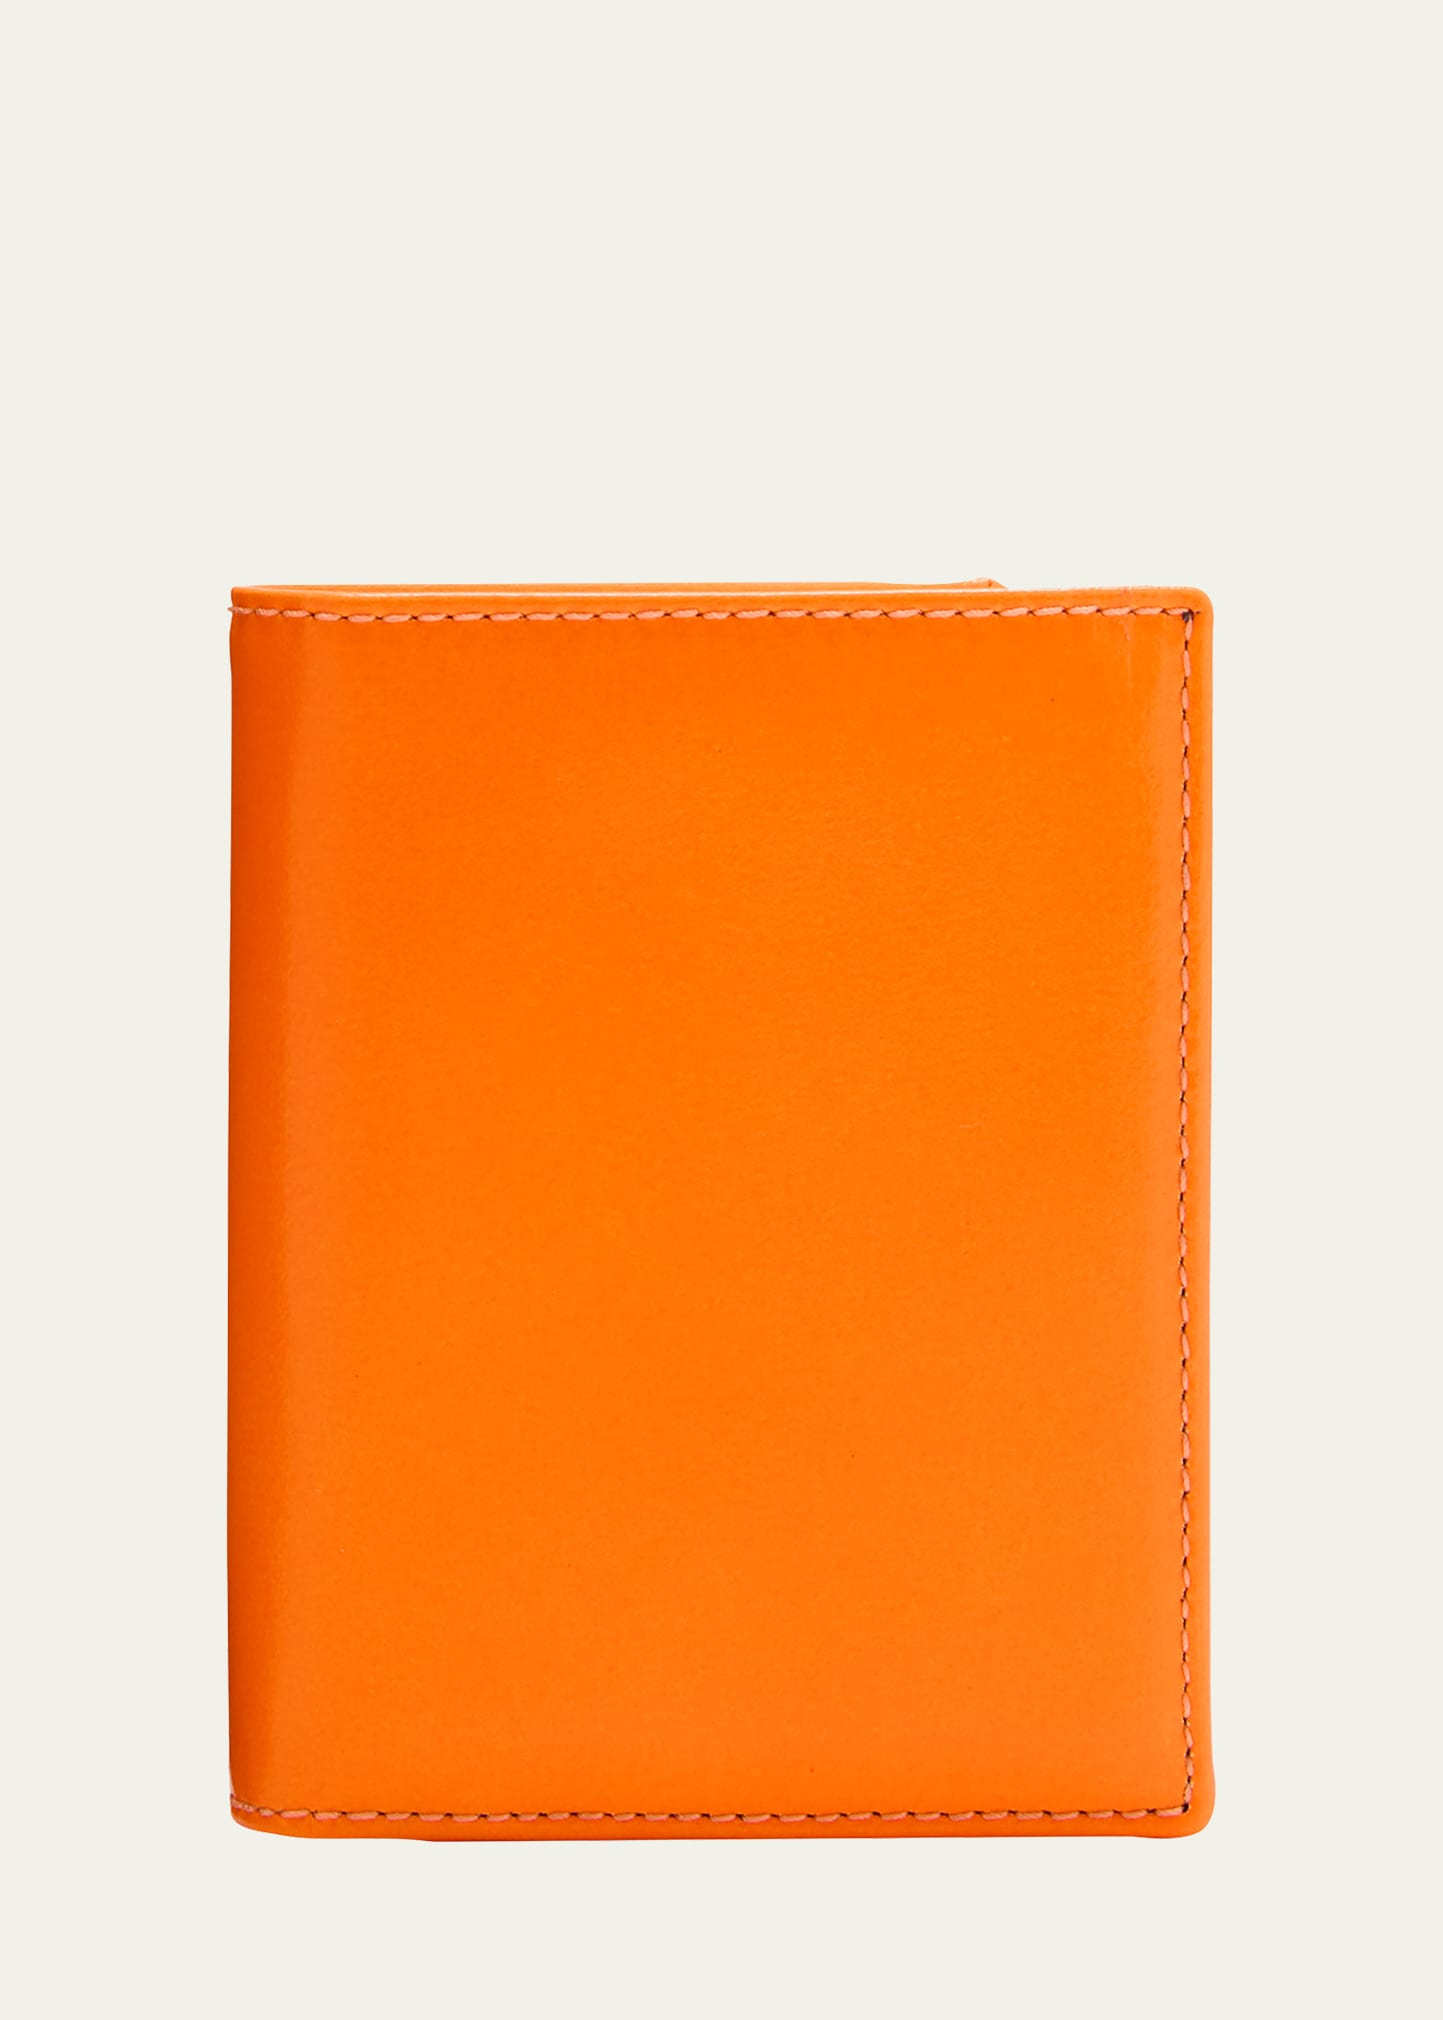 Pin on Men's Leather Wallets